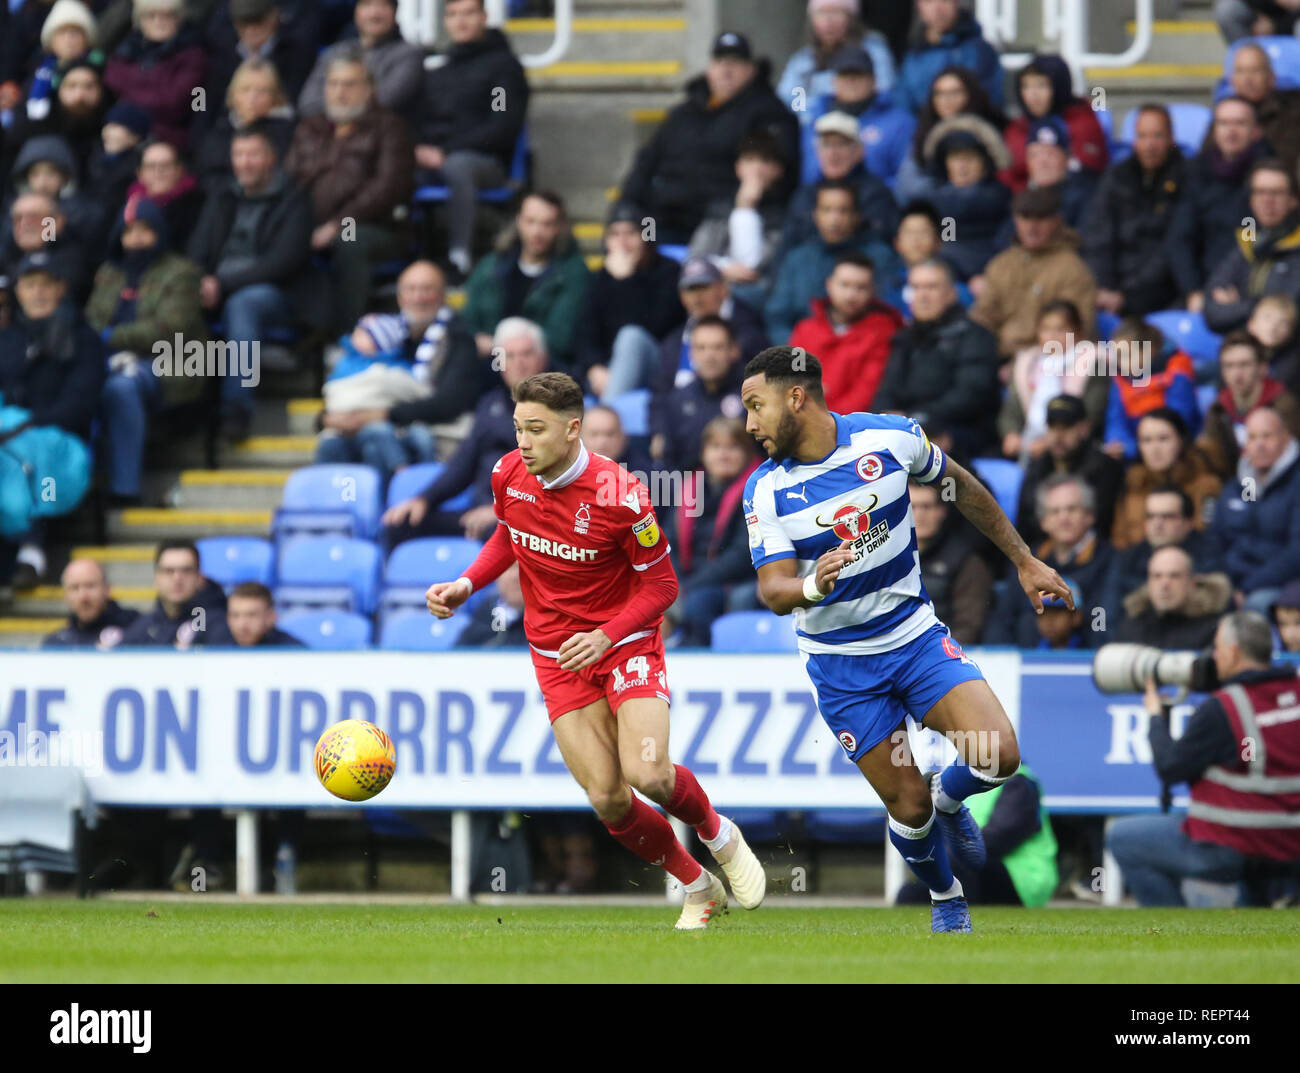 12th January 2019, Madejski Stadium, London, England; Sky Bet Championship, Reading vs Nottingham Forest ; Matty Cash (14) of Nottingham Forest goes past Liam Moore (06) of Reading.  Credit: Matt O'Connor/News Images,  English Football League images are subject to DataCo Licence Stock Photo